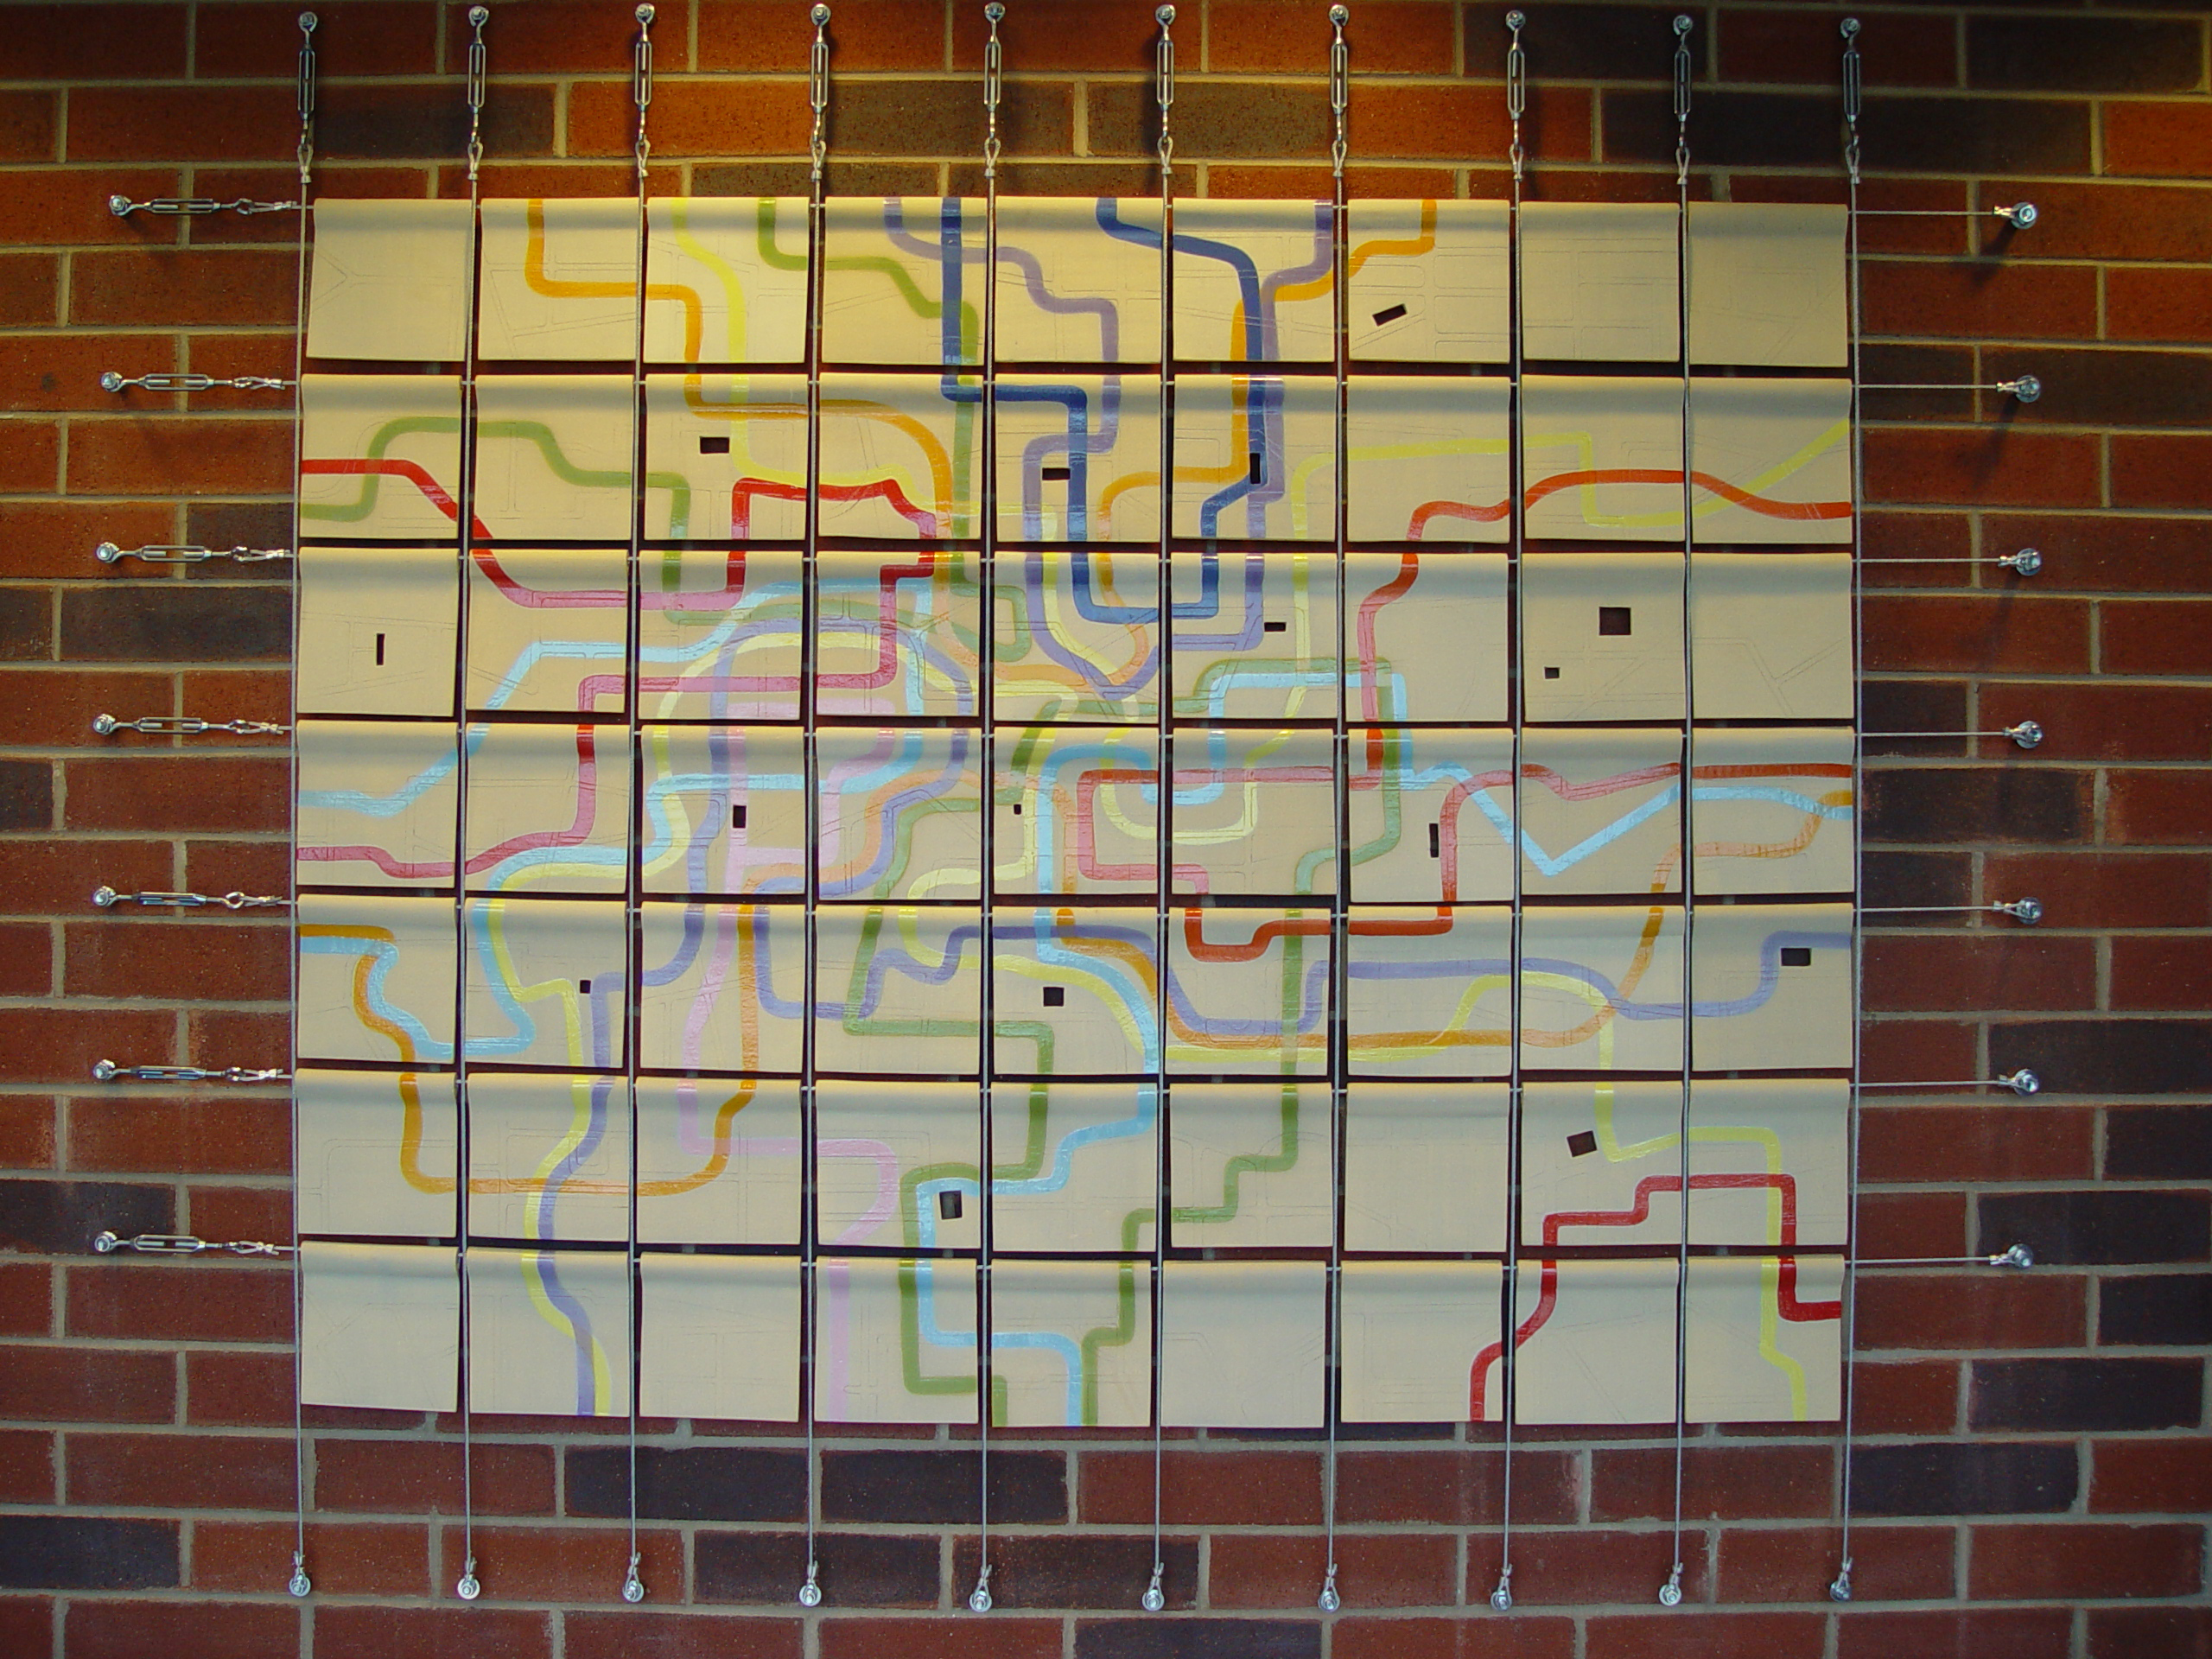 Wall art based off the CATS bus routes